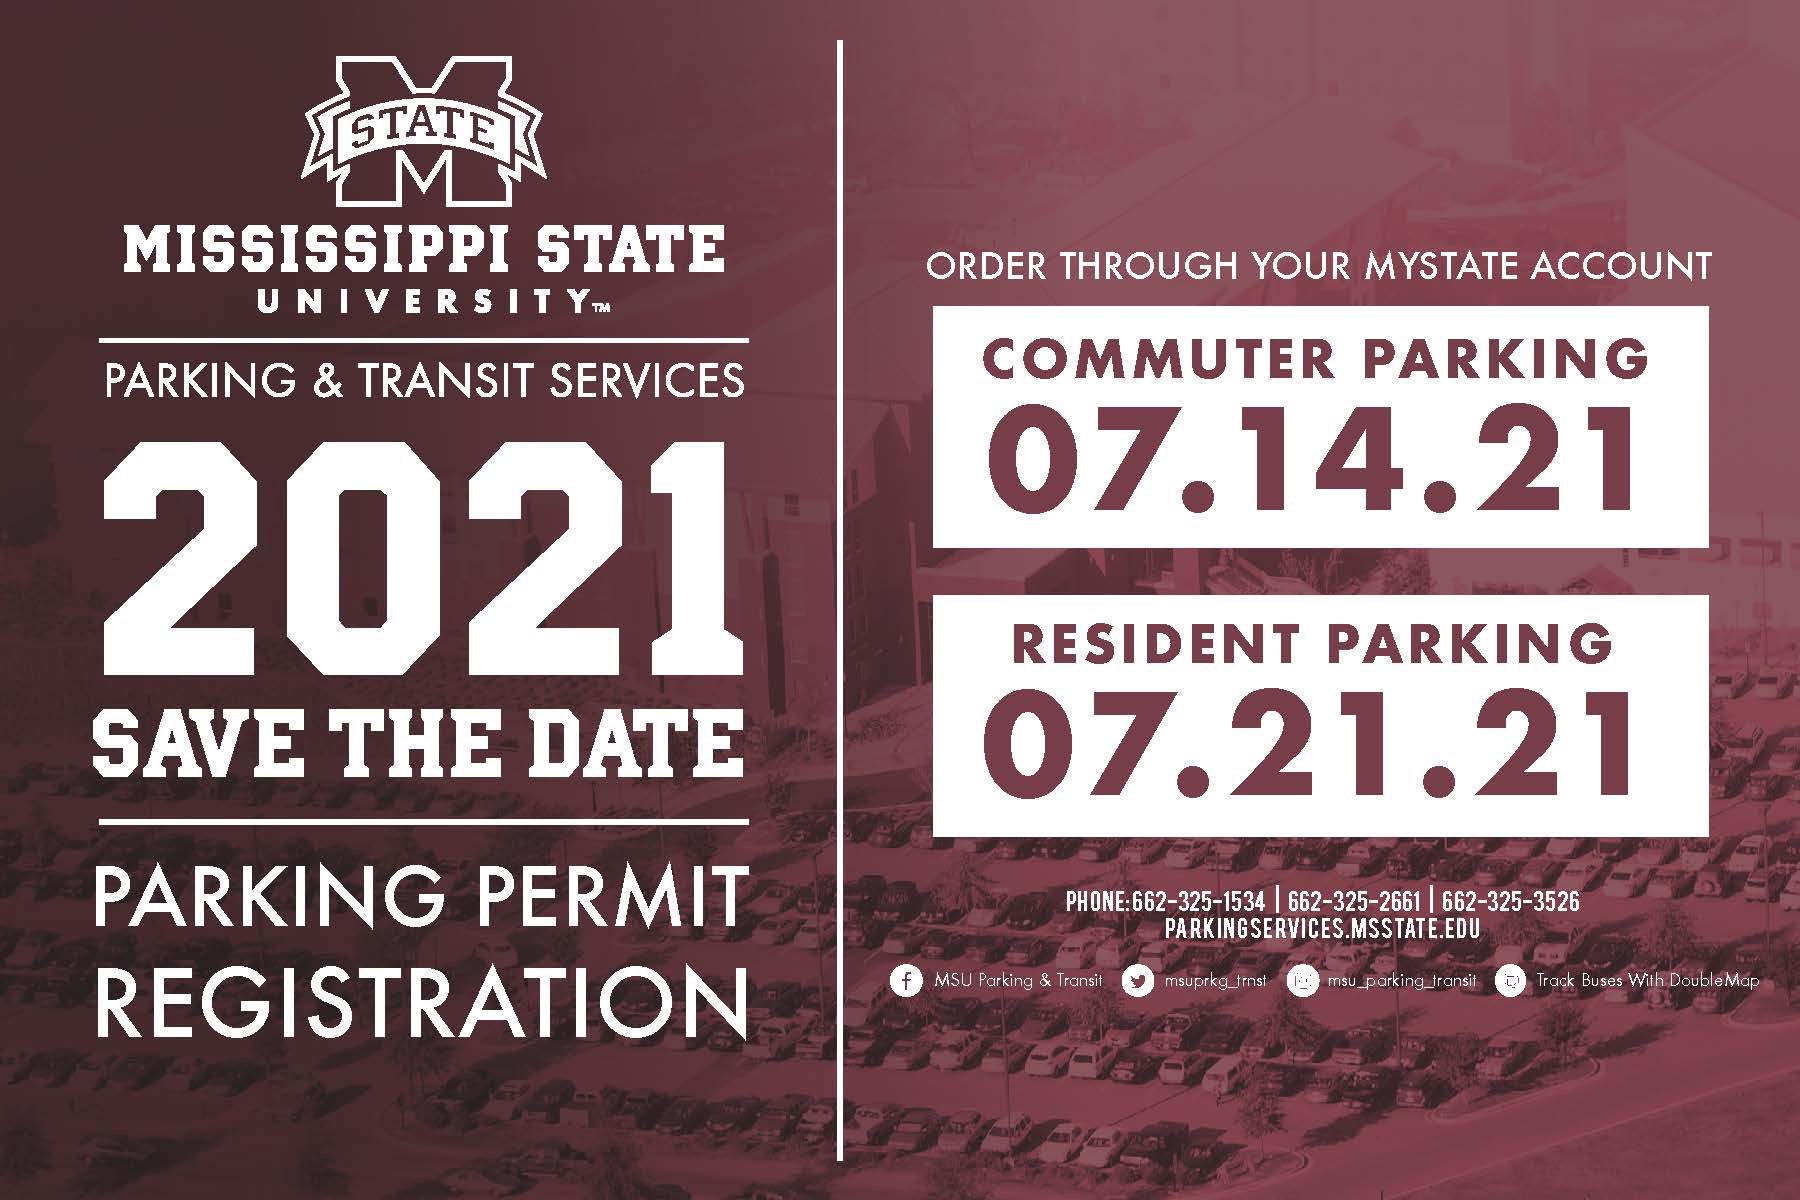 Maroon graphic with image of an MSU parking lot full of cars